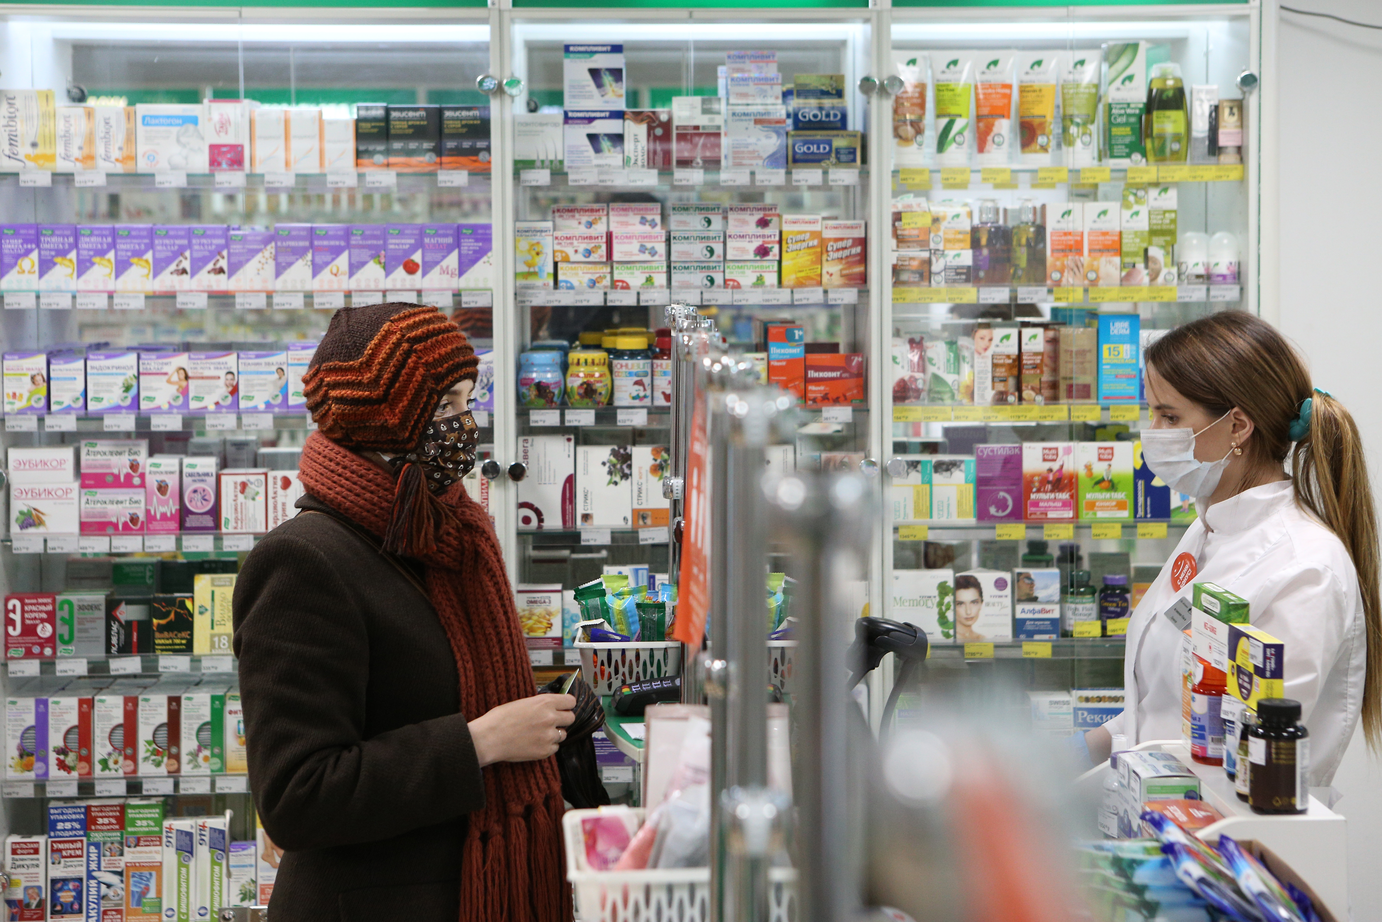 Independent Pharmacies ‘Fill an Increasingly Important Need in Communities’